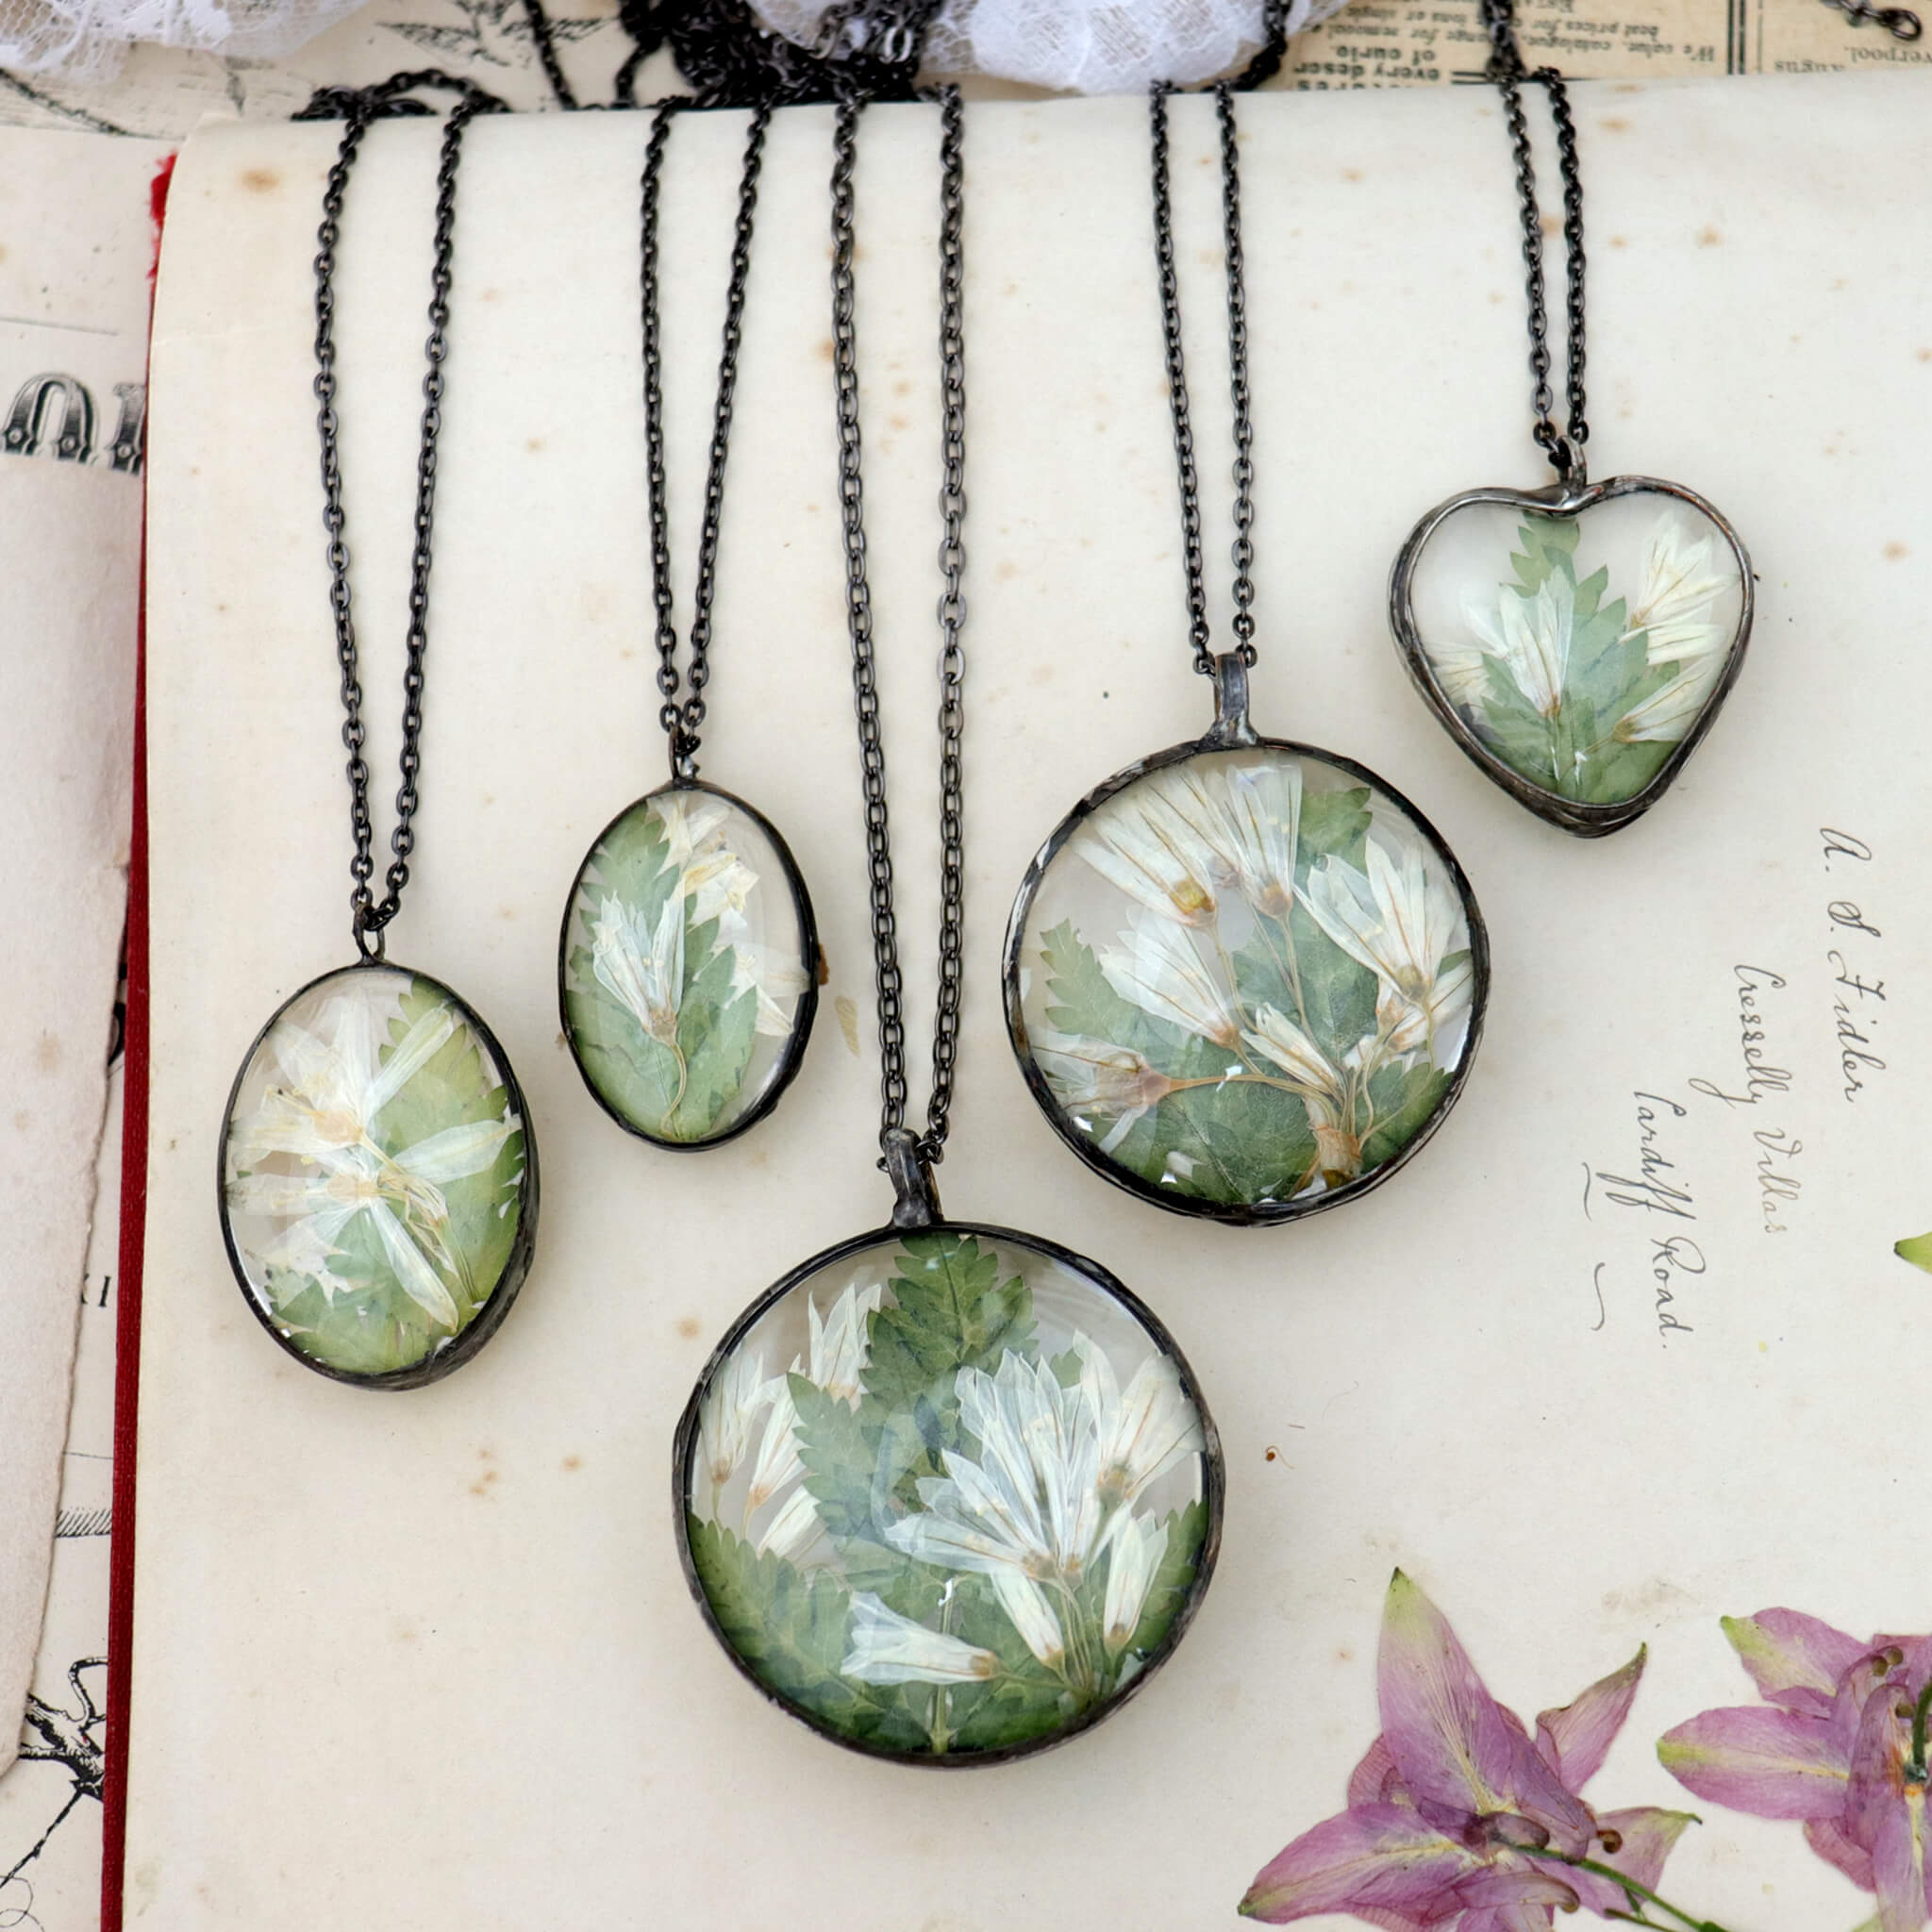 Five pressed flowers necklaces lying side by side on an old book